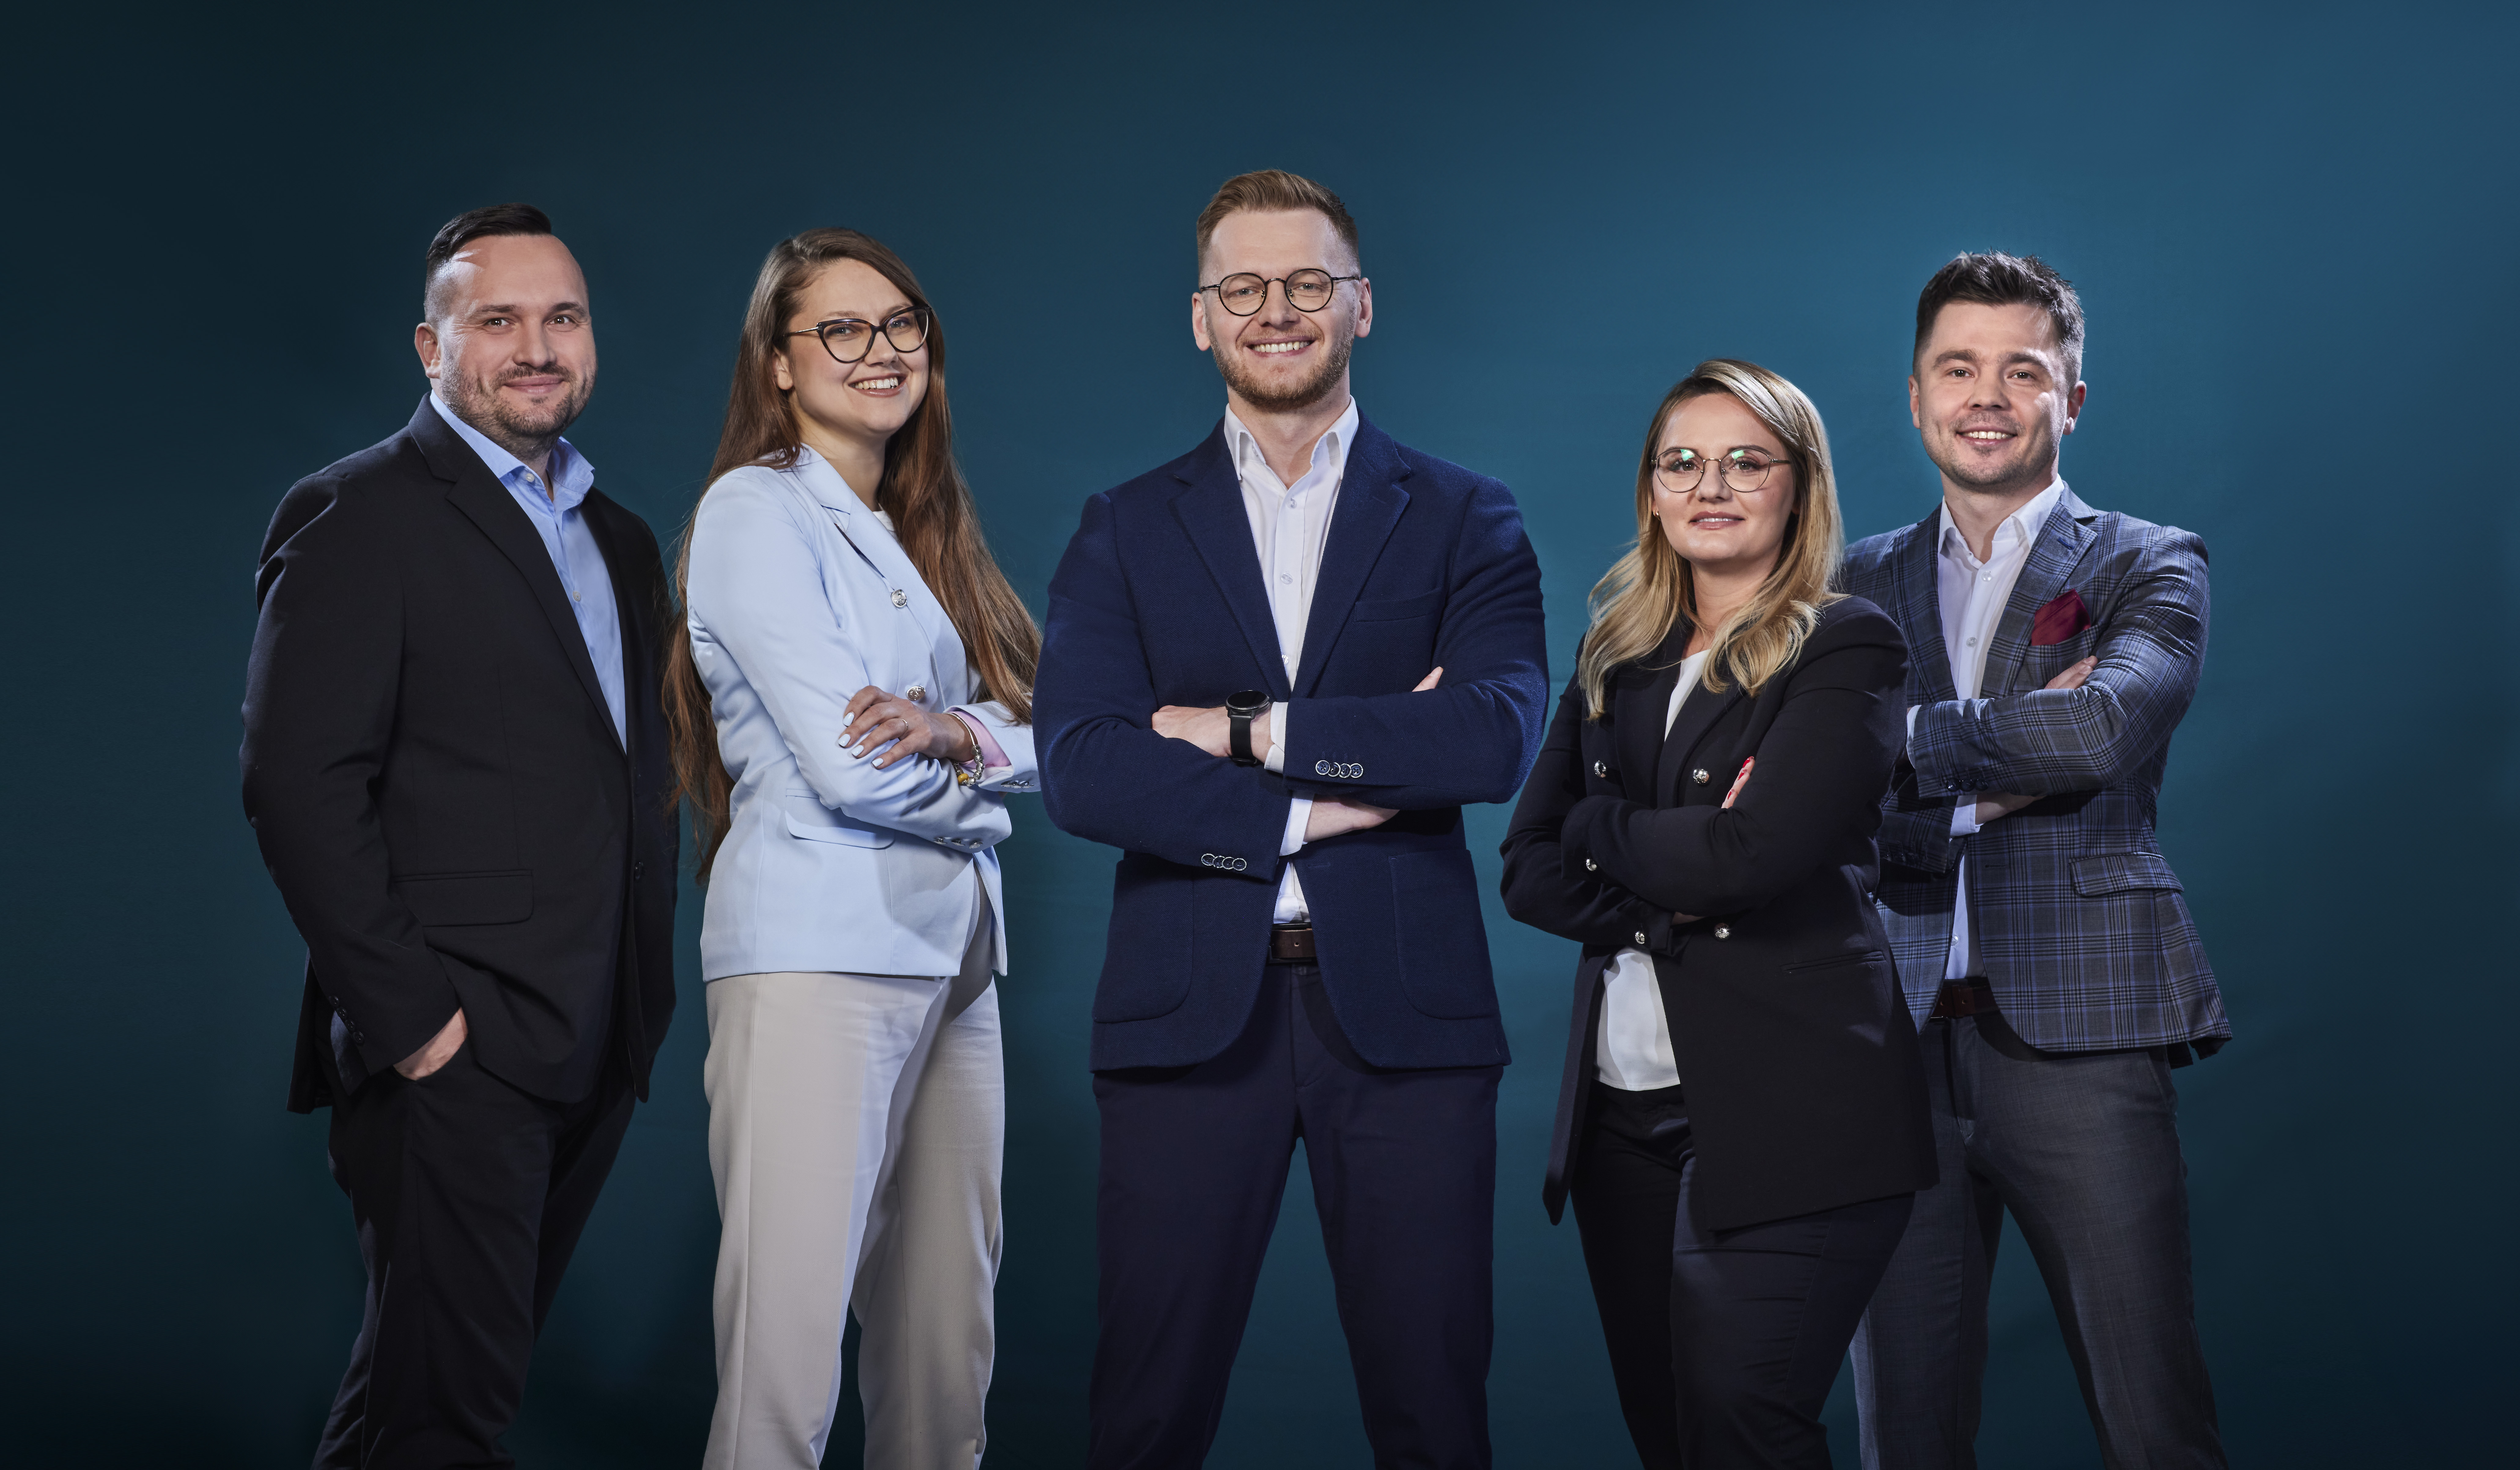 MLP Group expands its team